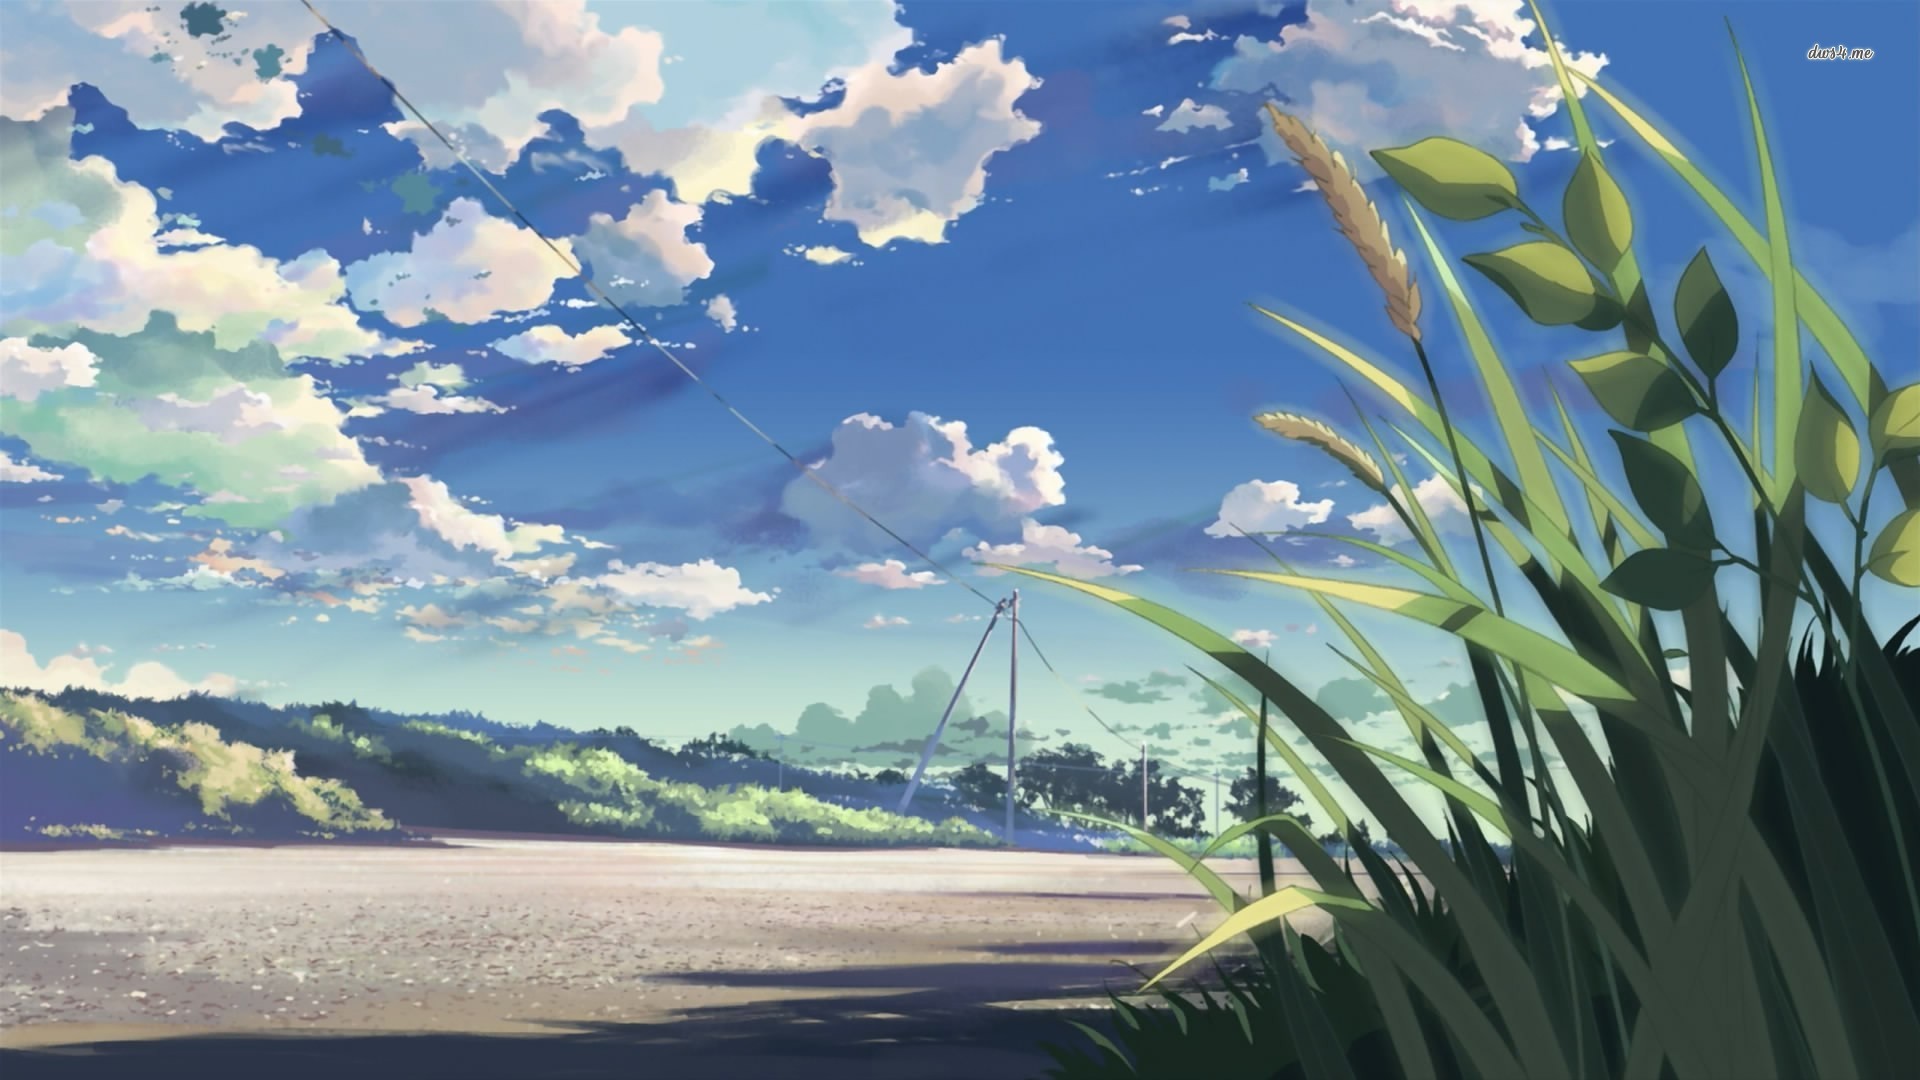 Centimeters Per Second wallpaper - Anime wallpapers -